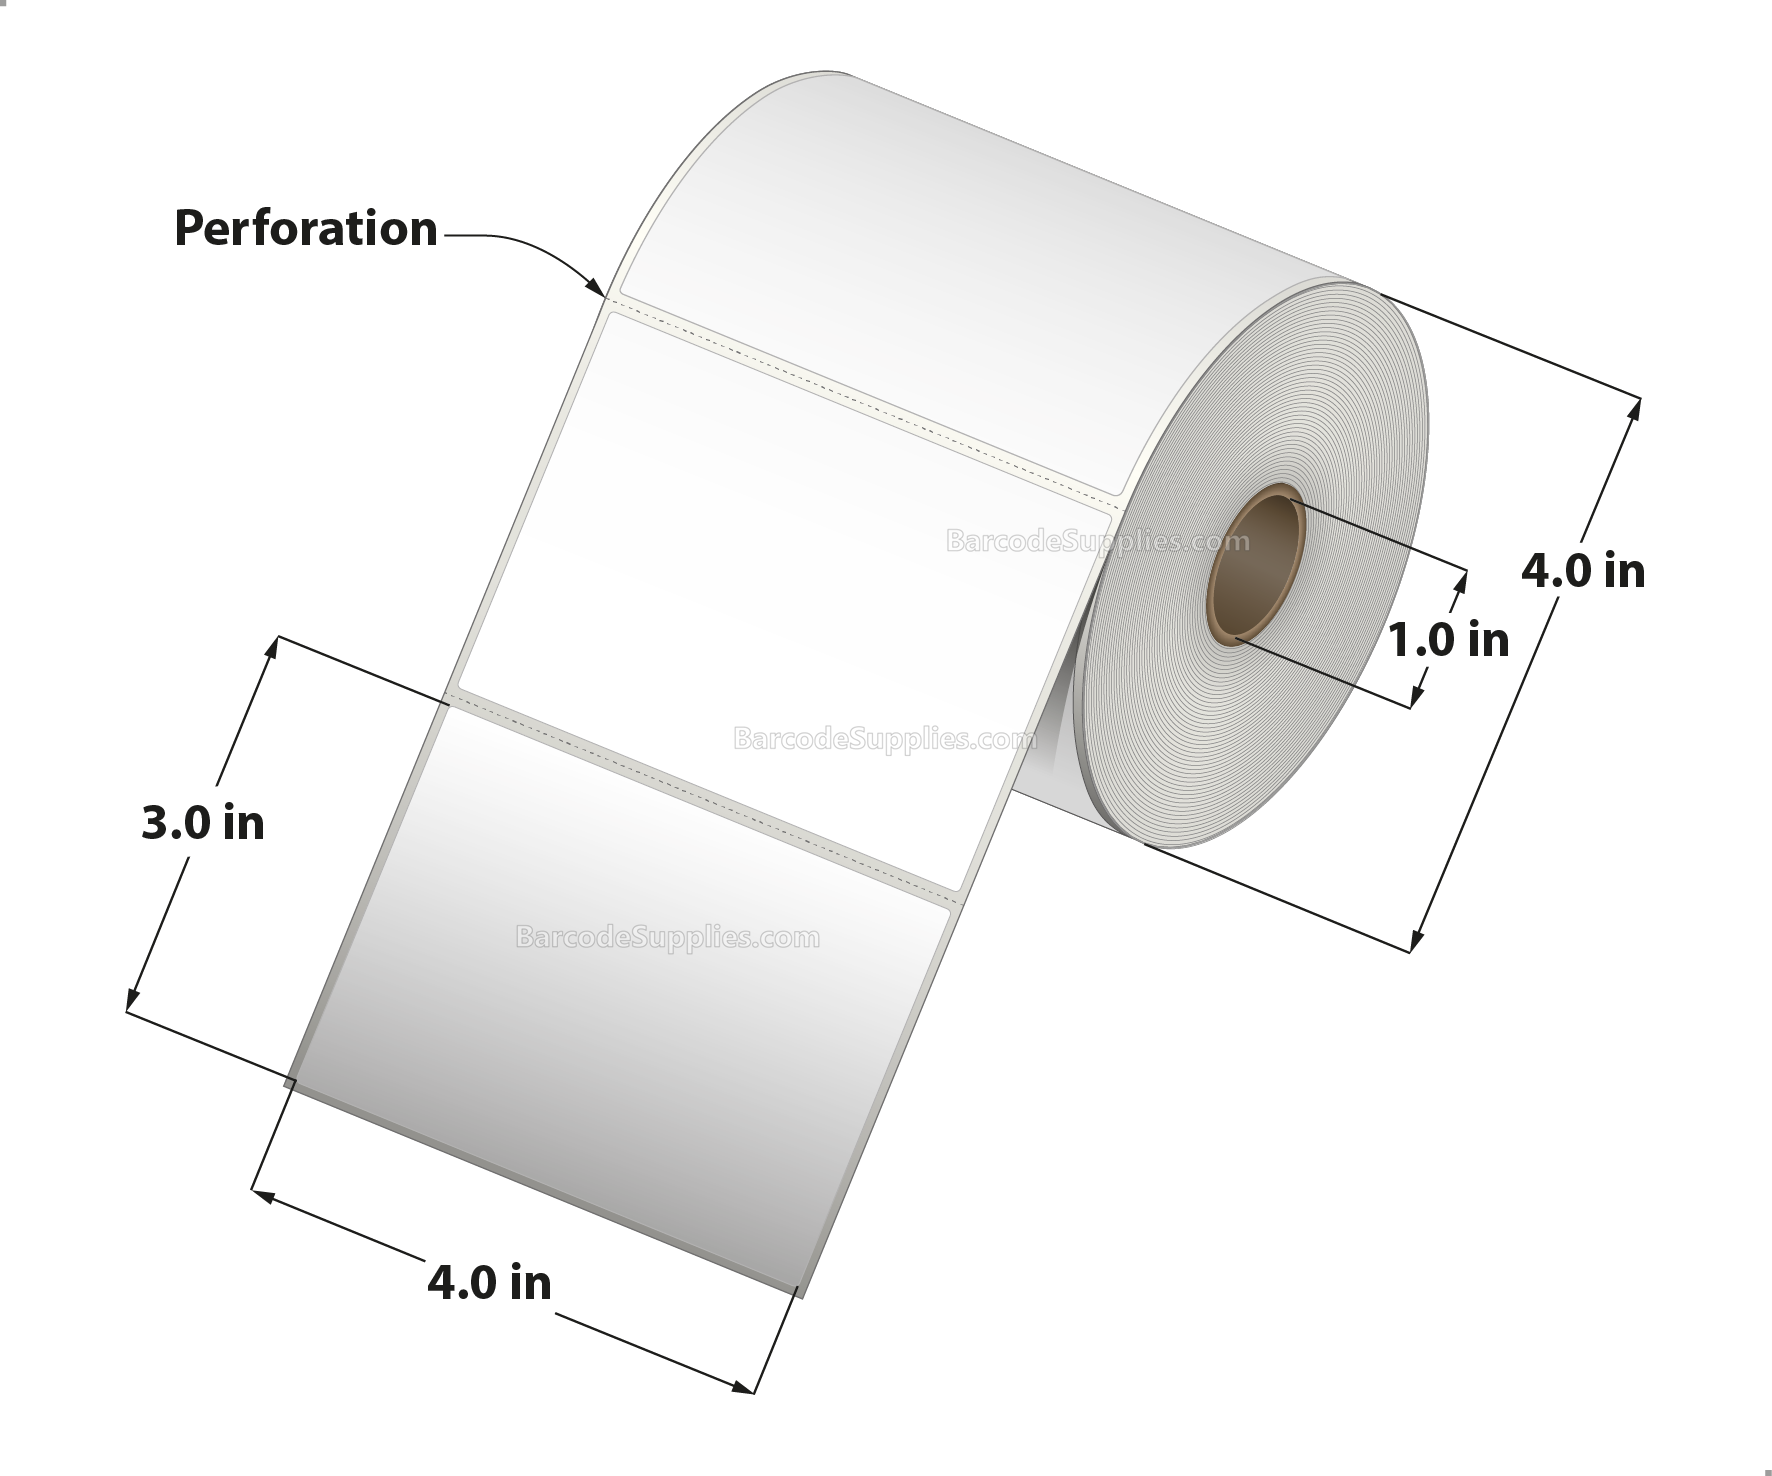 4 x 3 Direct Thermal White Labels With Rubber Adhesive - Perforated - 500 Labels Per Roll - Carton Of 12 Rolls - 6000 Labels Total - MPN: RDT4-400300-1P